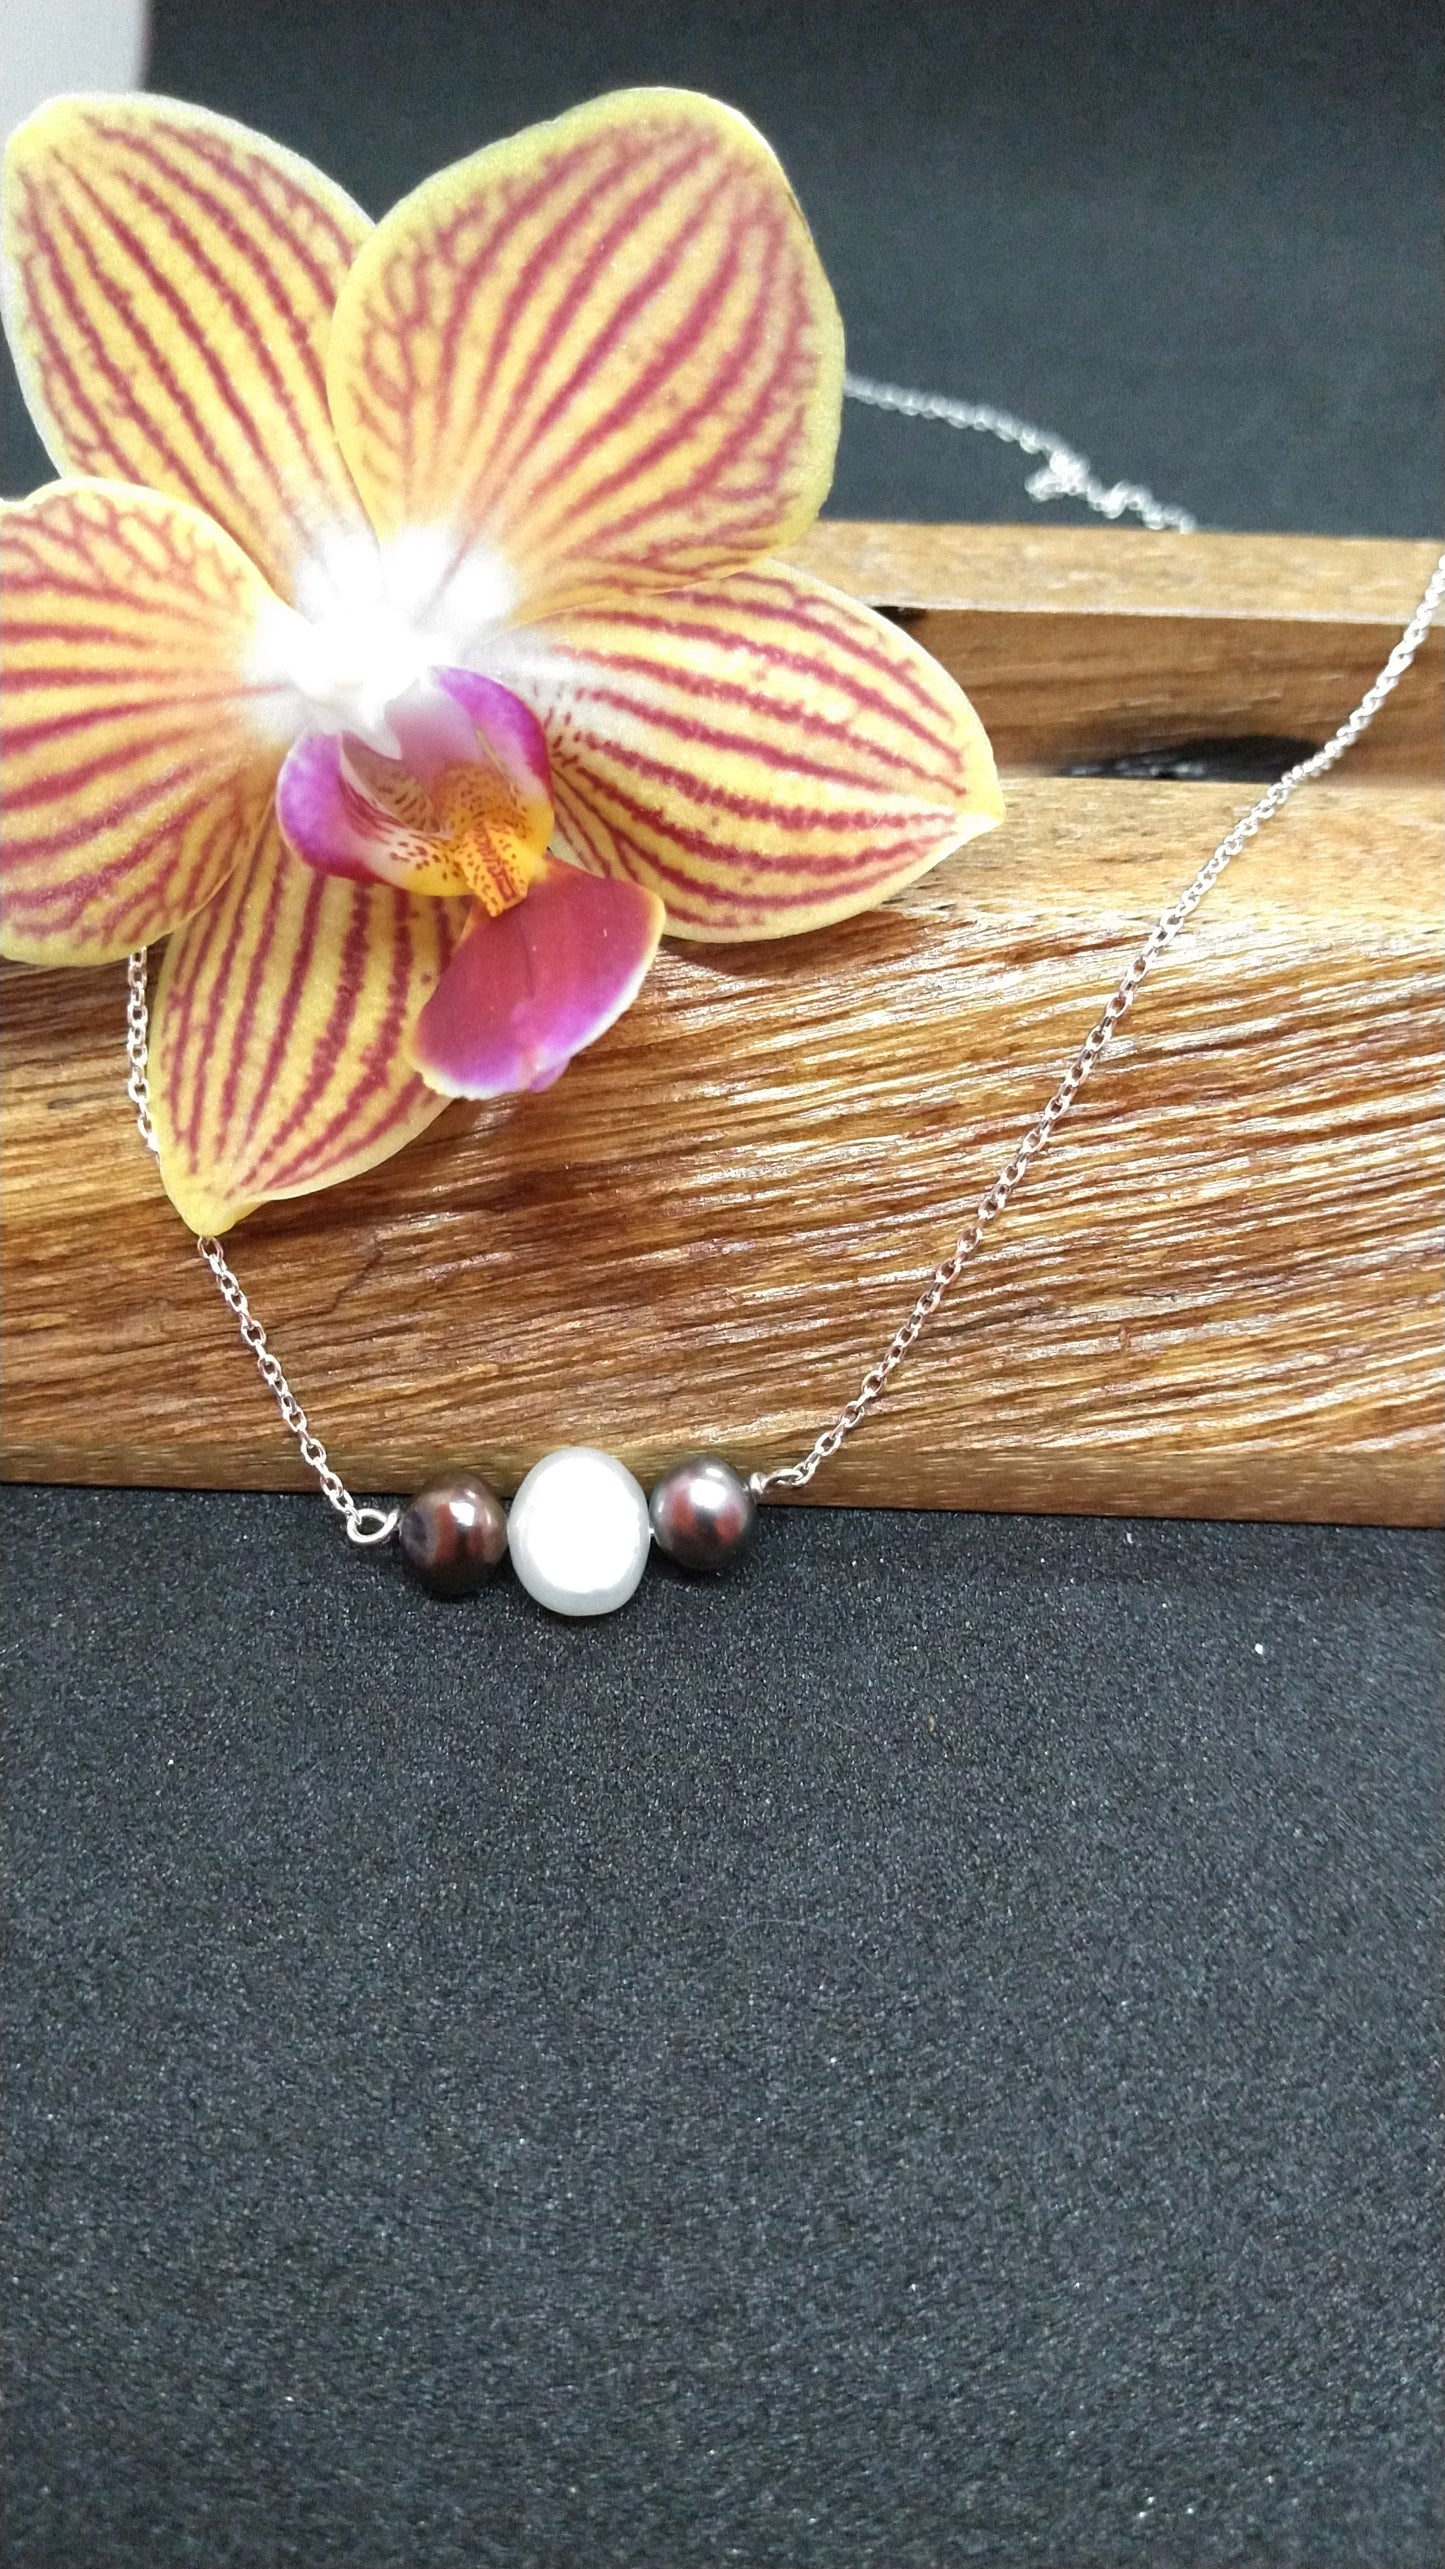 3 Pearl Silver Necklace: White and Peacock Pearls